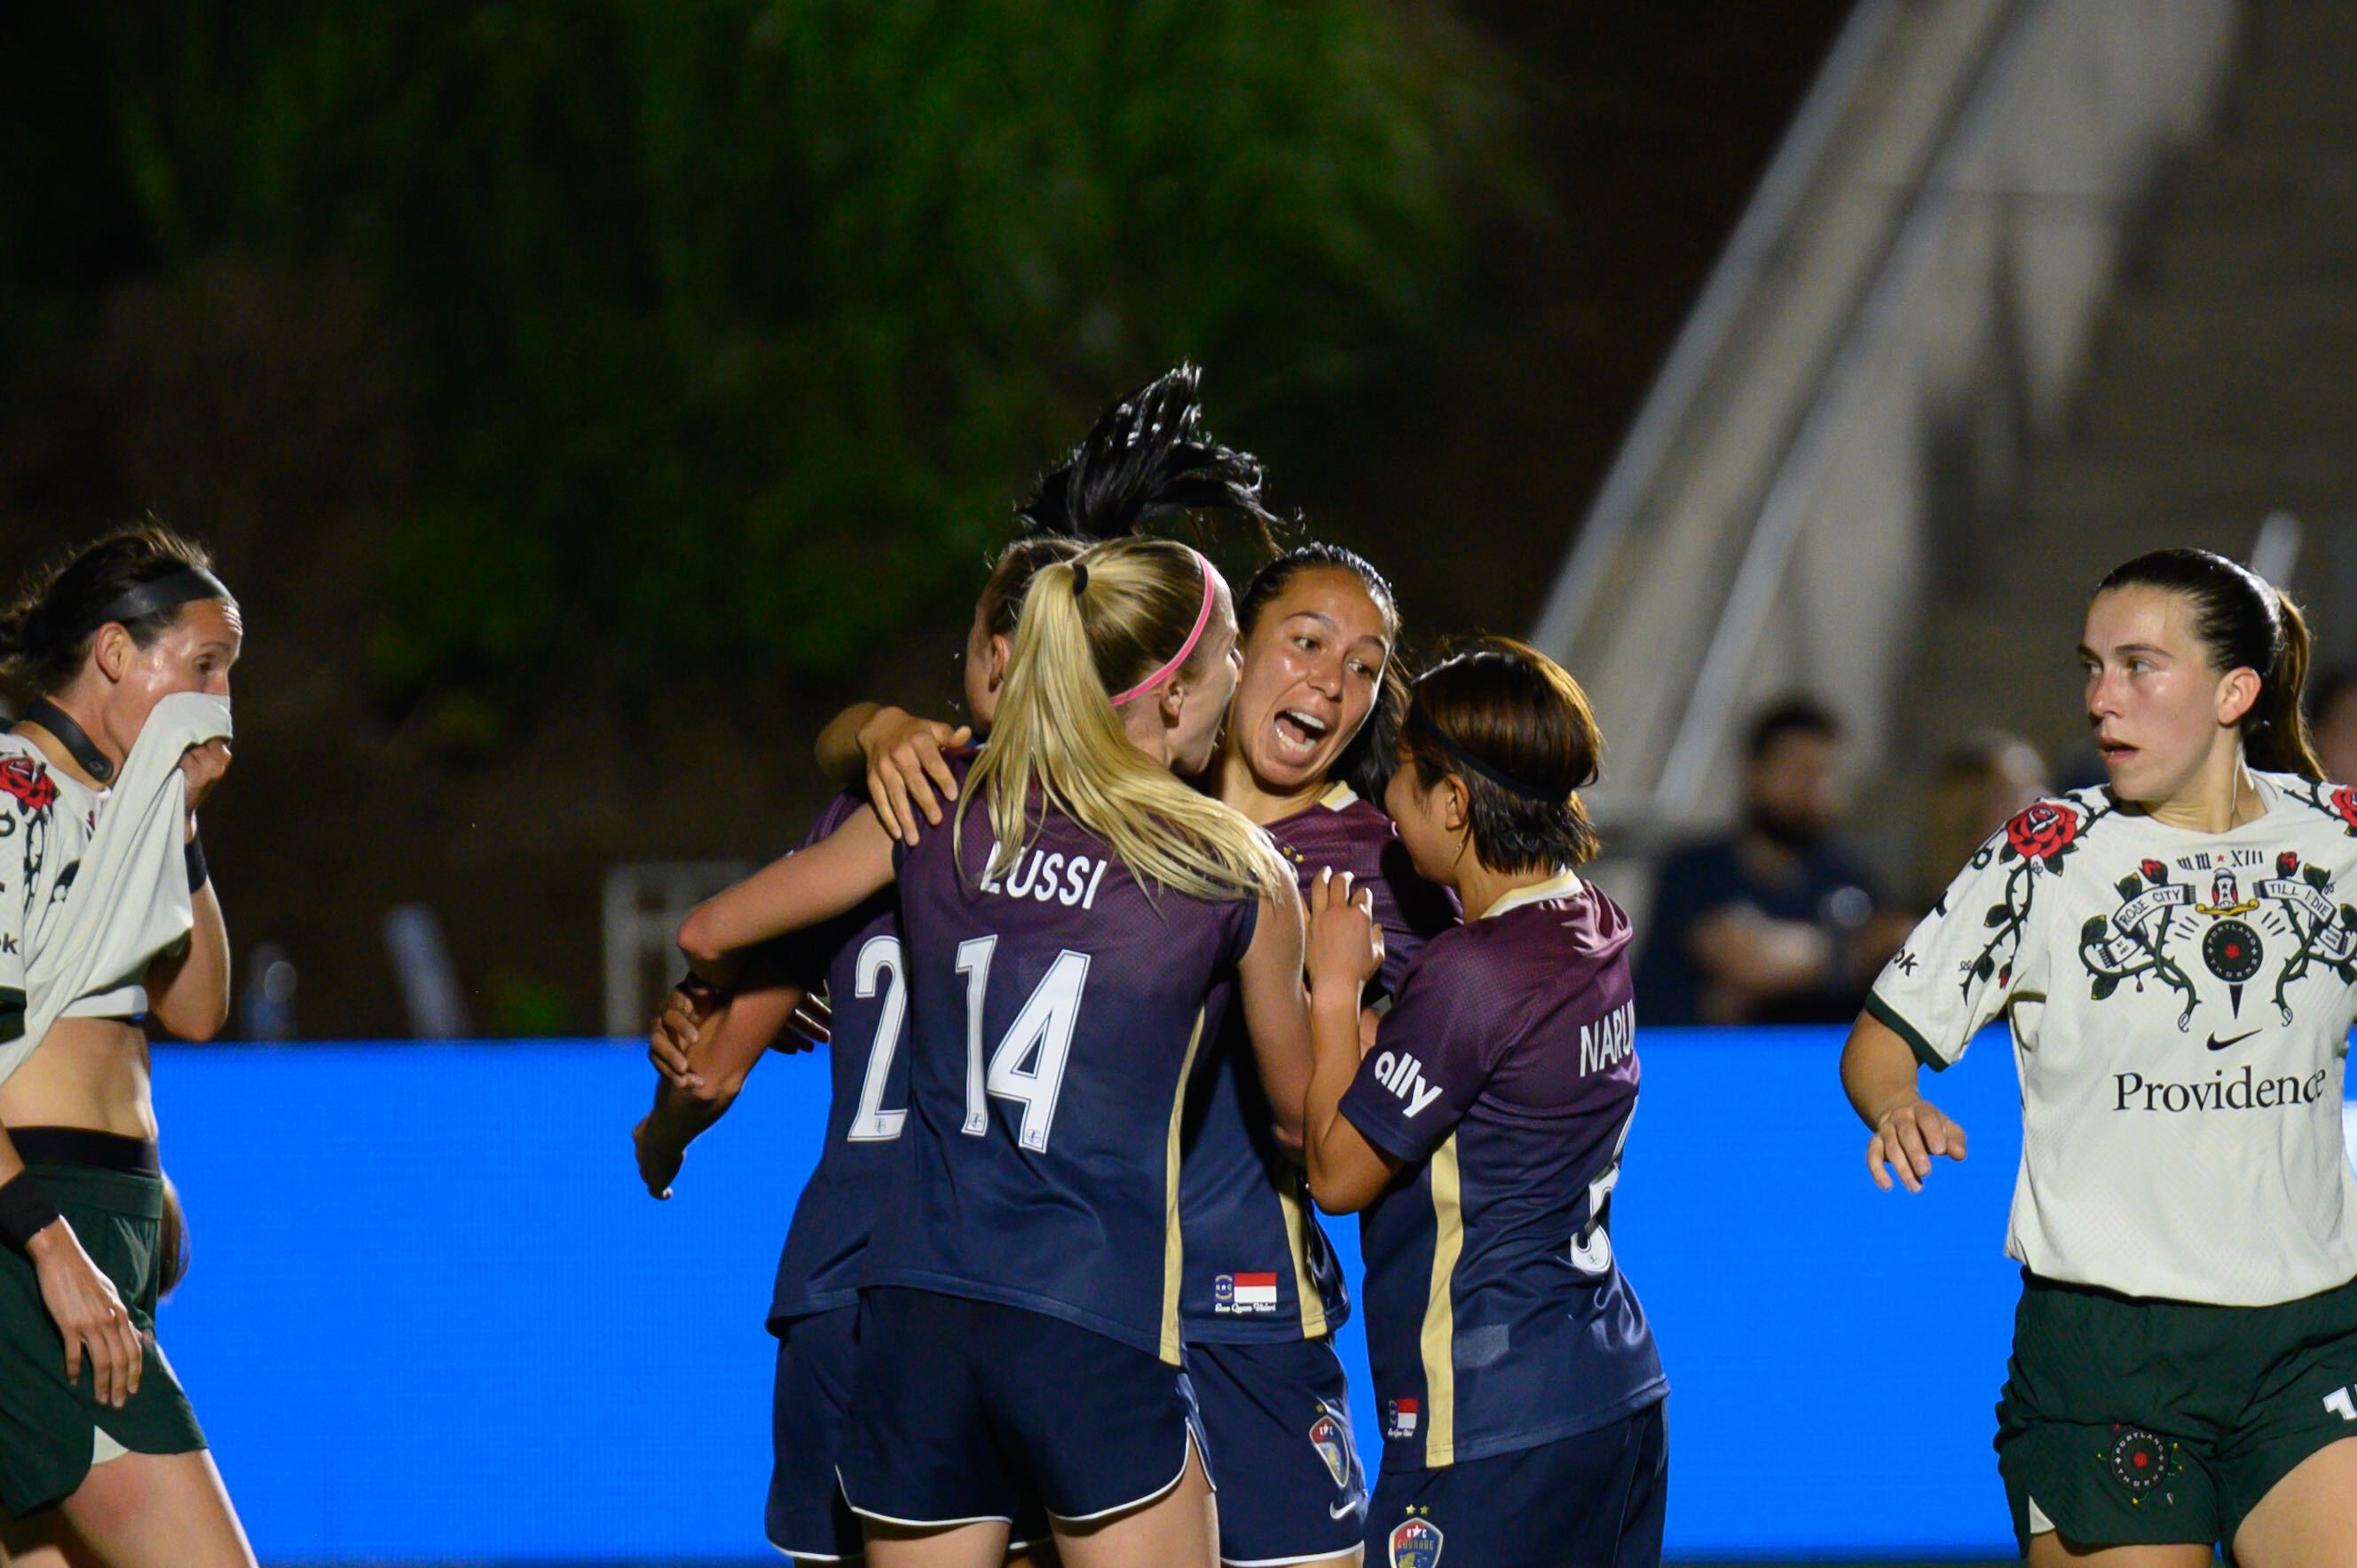 NC COURAGE PARTNERS WITH BALLY SPORTS SOUTH FOR REGIONAL BROADCASTS